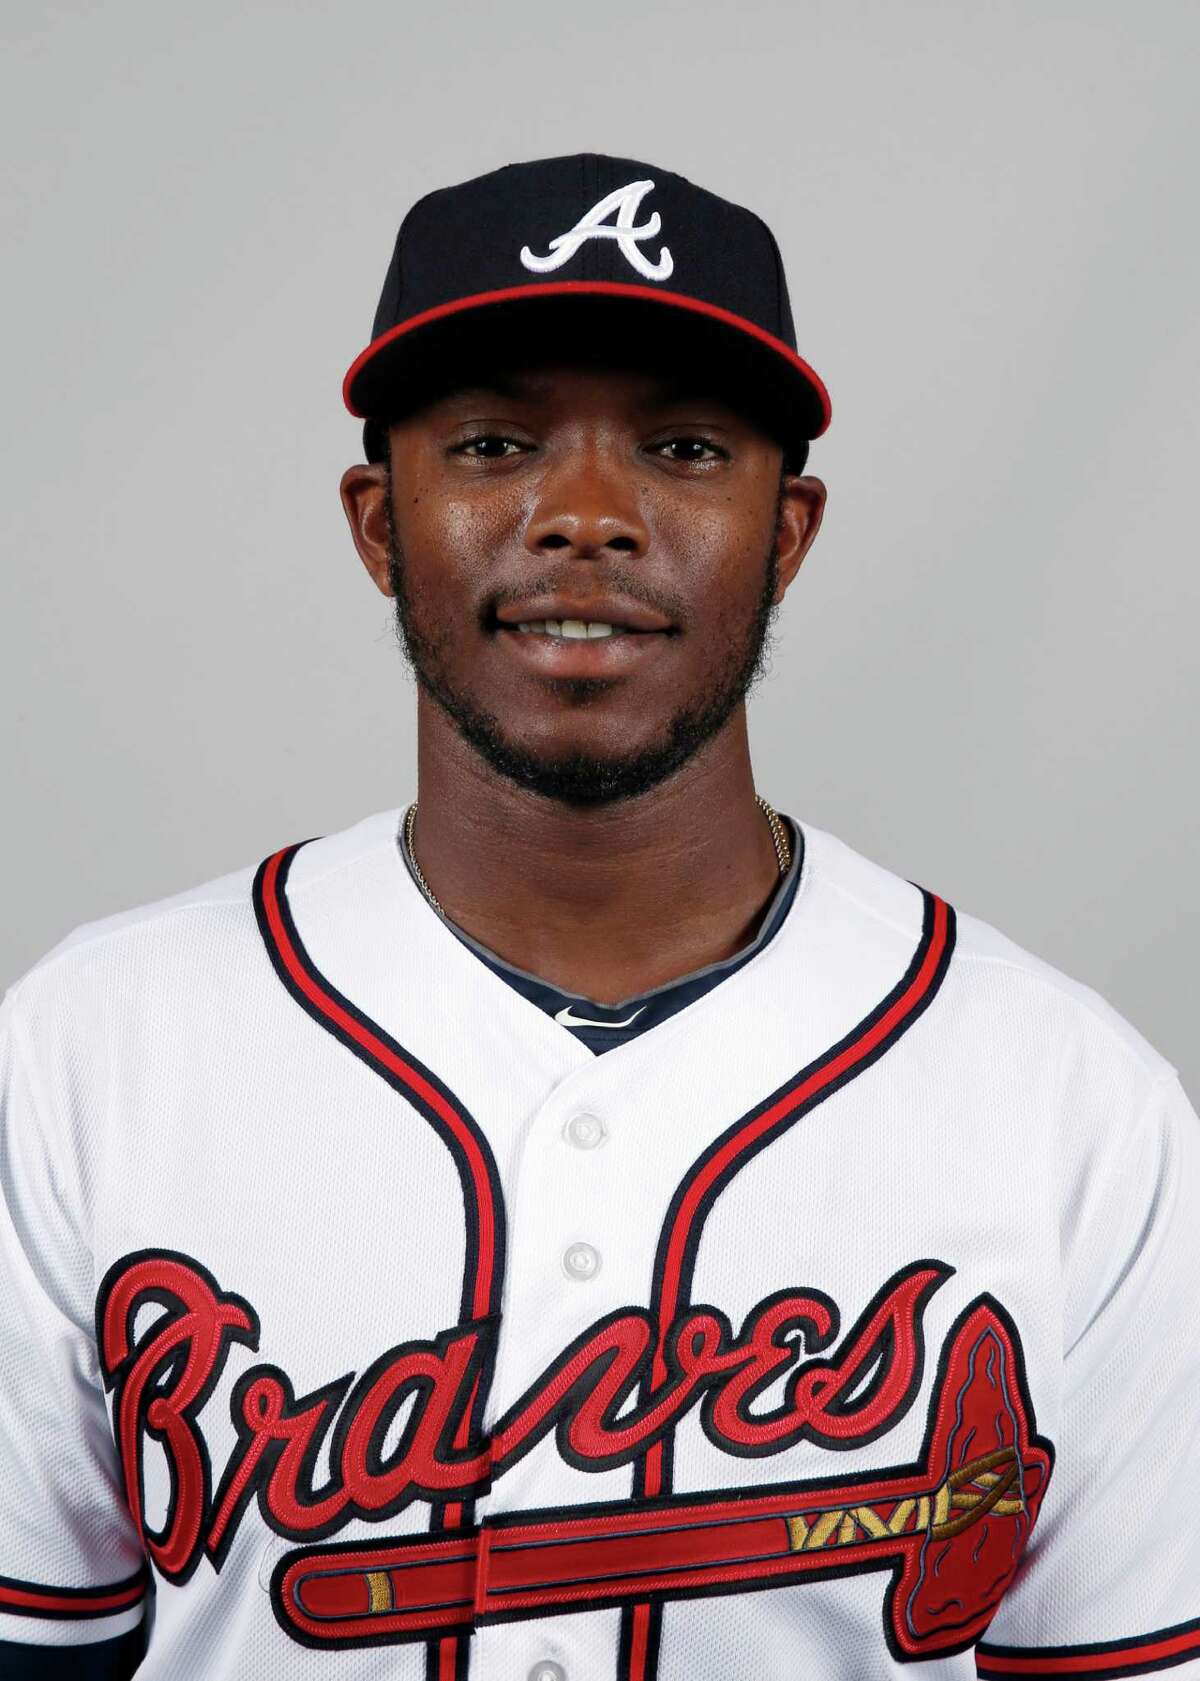 MLB: Padres keep dealing, land Upton from Braves